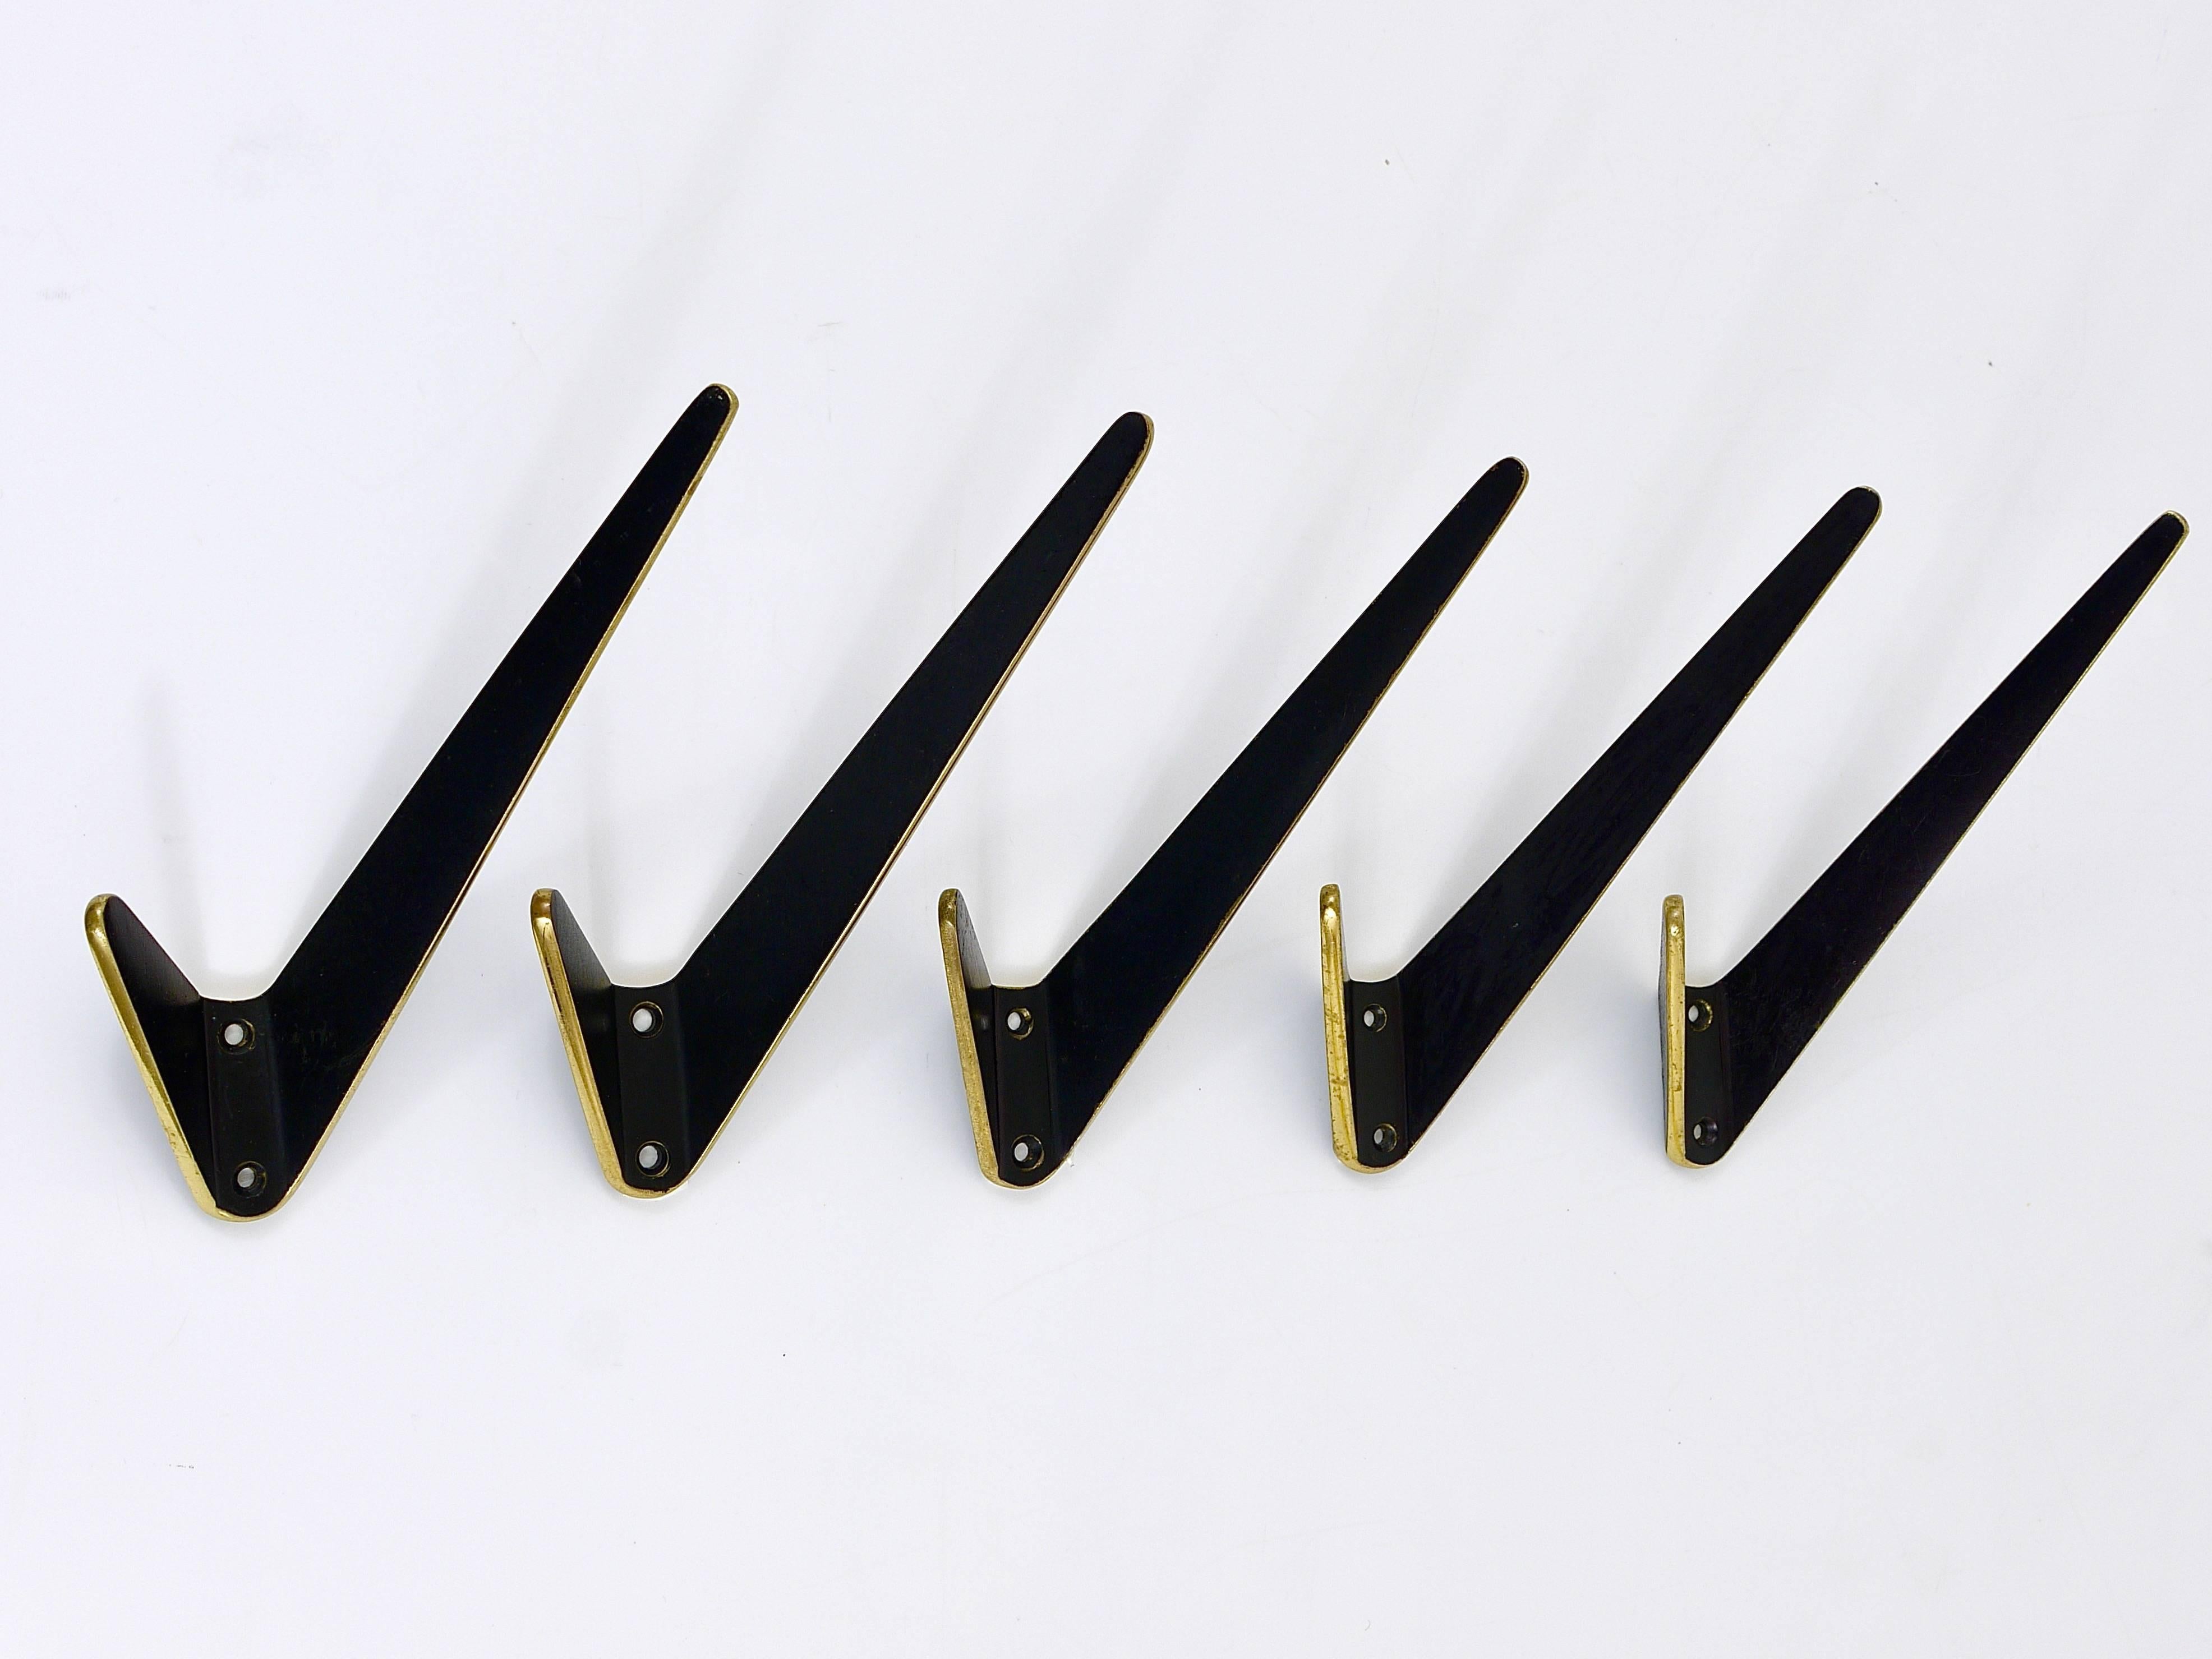 Up to Eight Asymmetrical Midcentury Black Brass Wall Hooks, Austria, 1950s For Sale 1